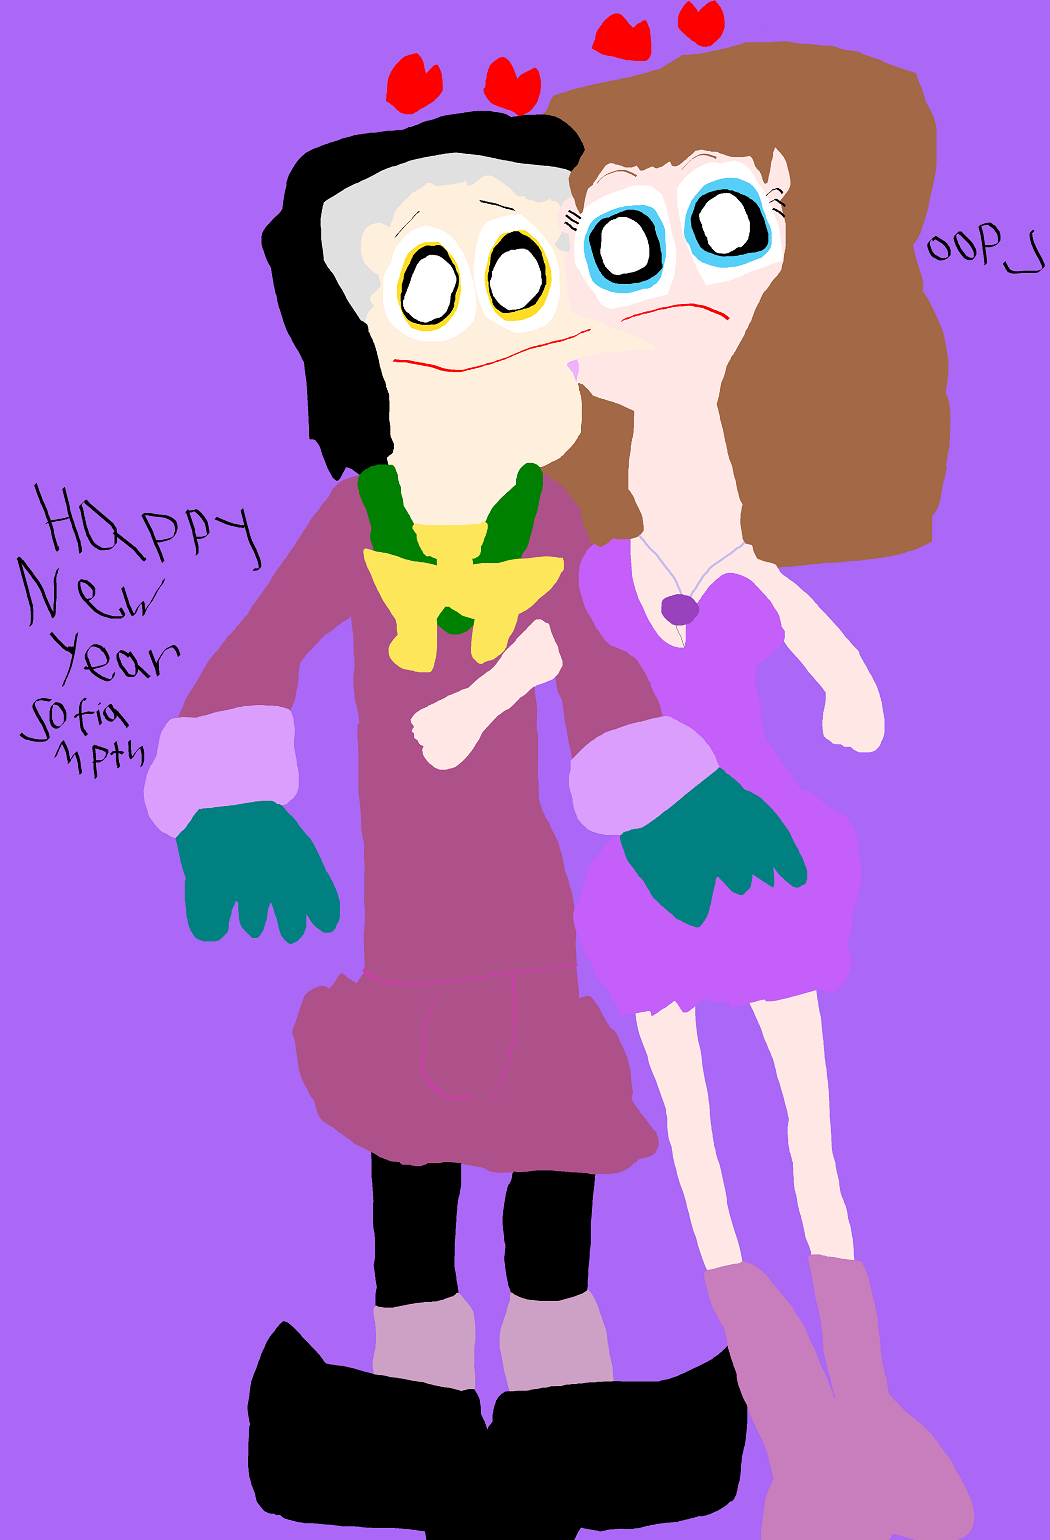 Happy New Year Cedfia Trip And Kiss MS Paint Bigger Version by Falconlobo